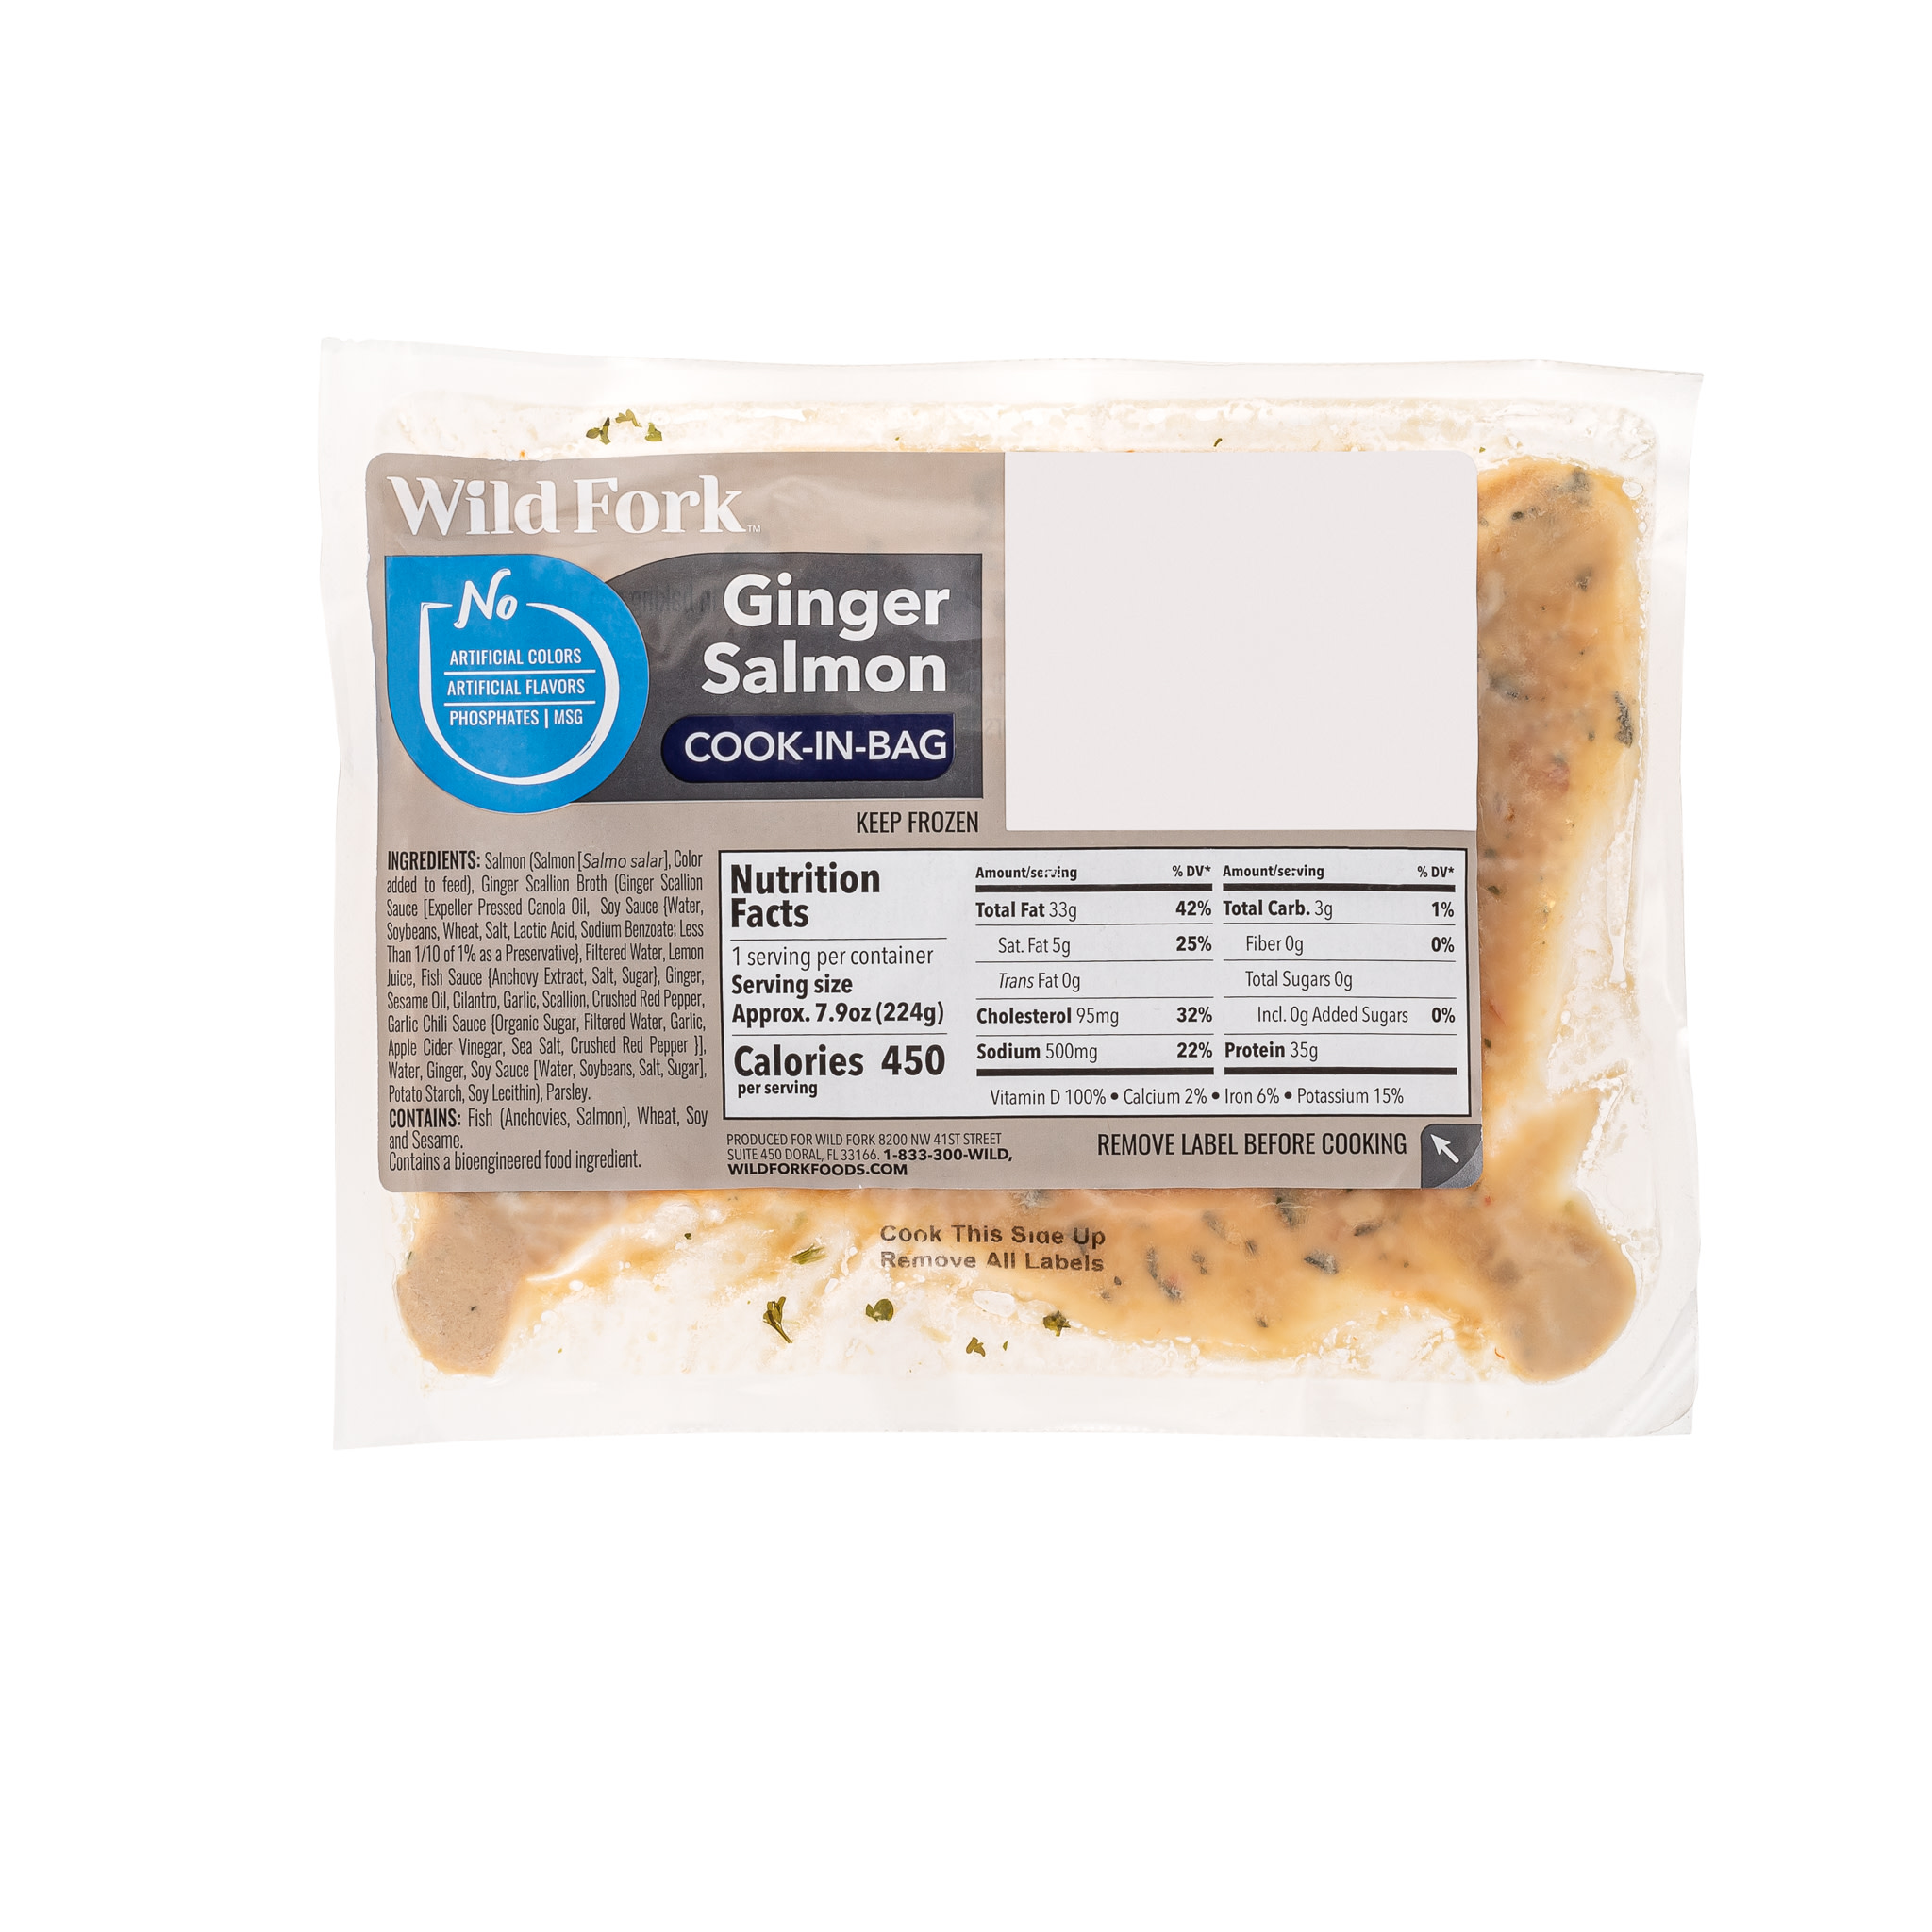 6126 WF PACKAGED Skinless Salmon Ginger (Cook-In-Bag) Seafood